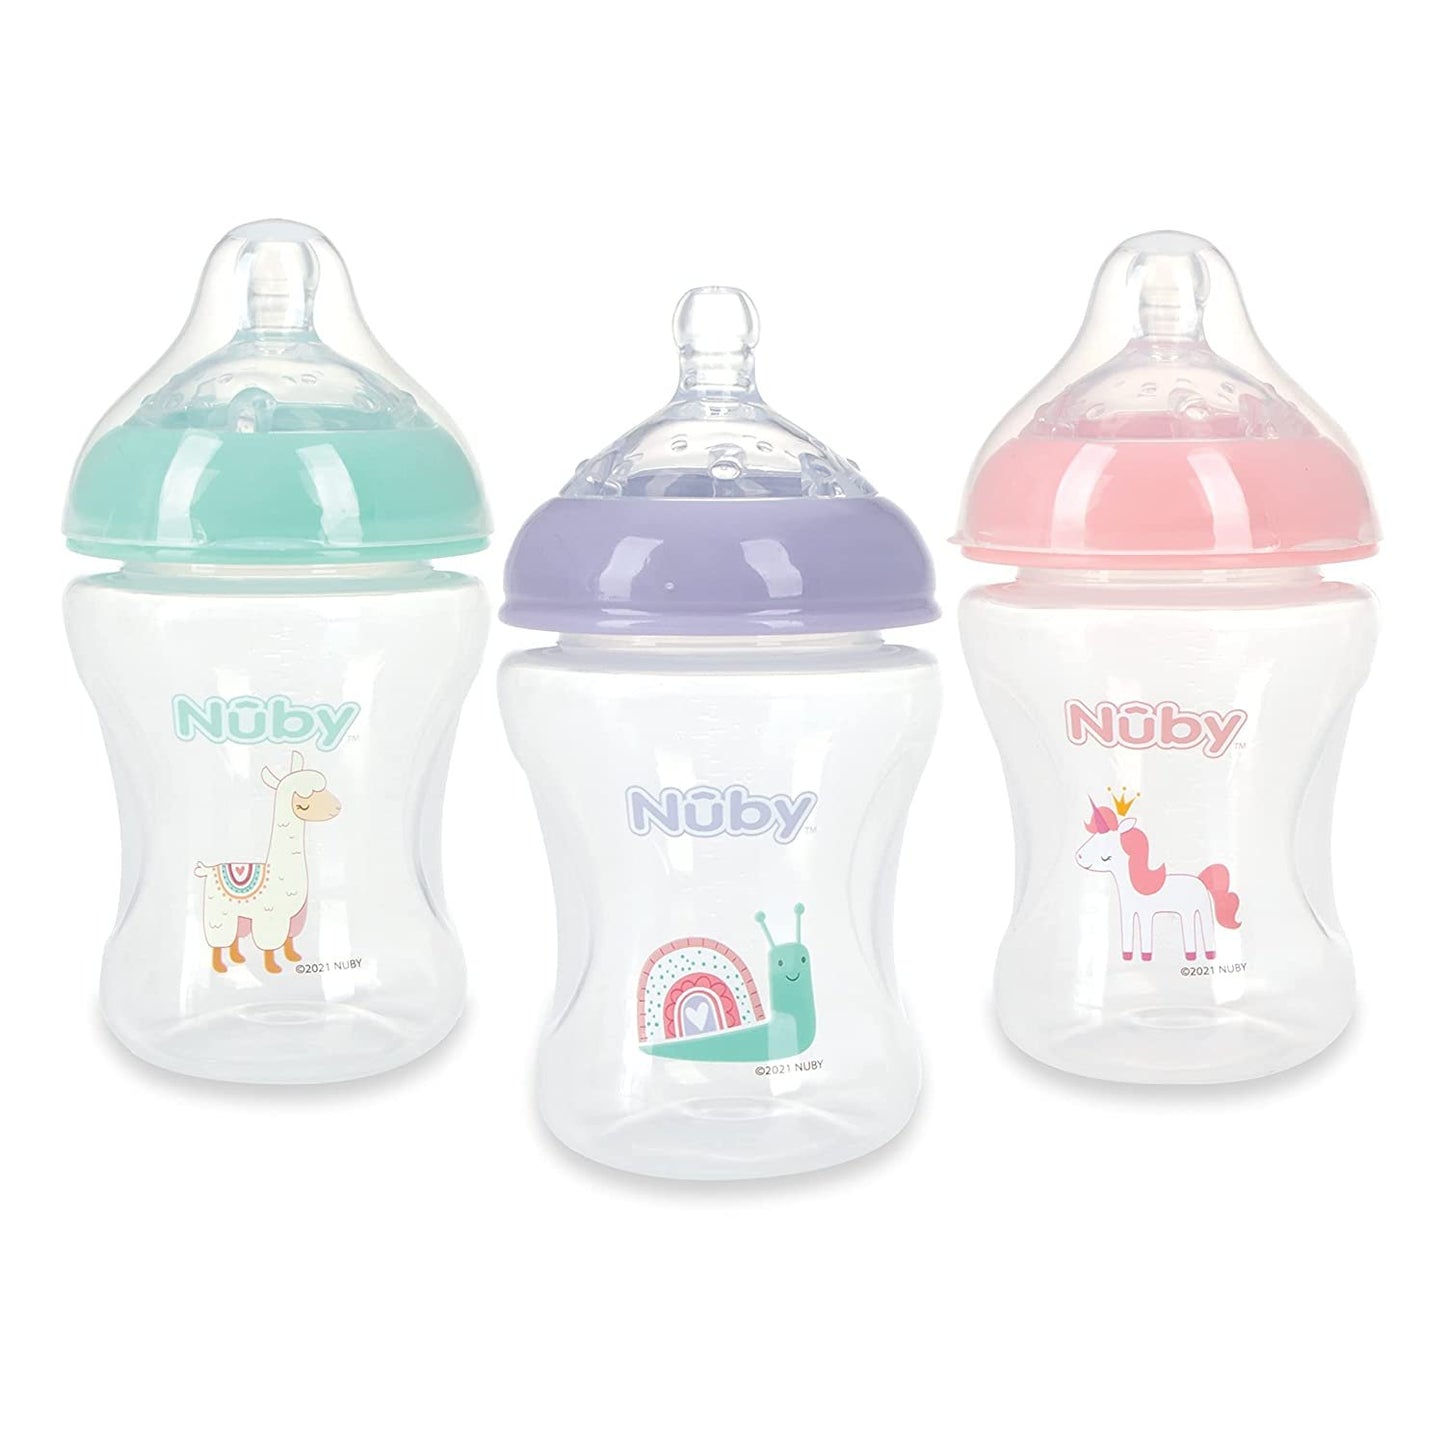 Nuby 3-Pack Infant Feeding Bottles with Slow Flow Breast Size Silicone Nipple: 0+ Months, 8oz, 3 Pack Set: Delicate Llama, Snail, Unicorn Prints